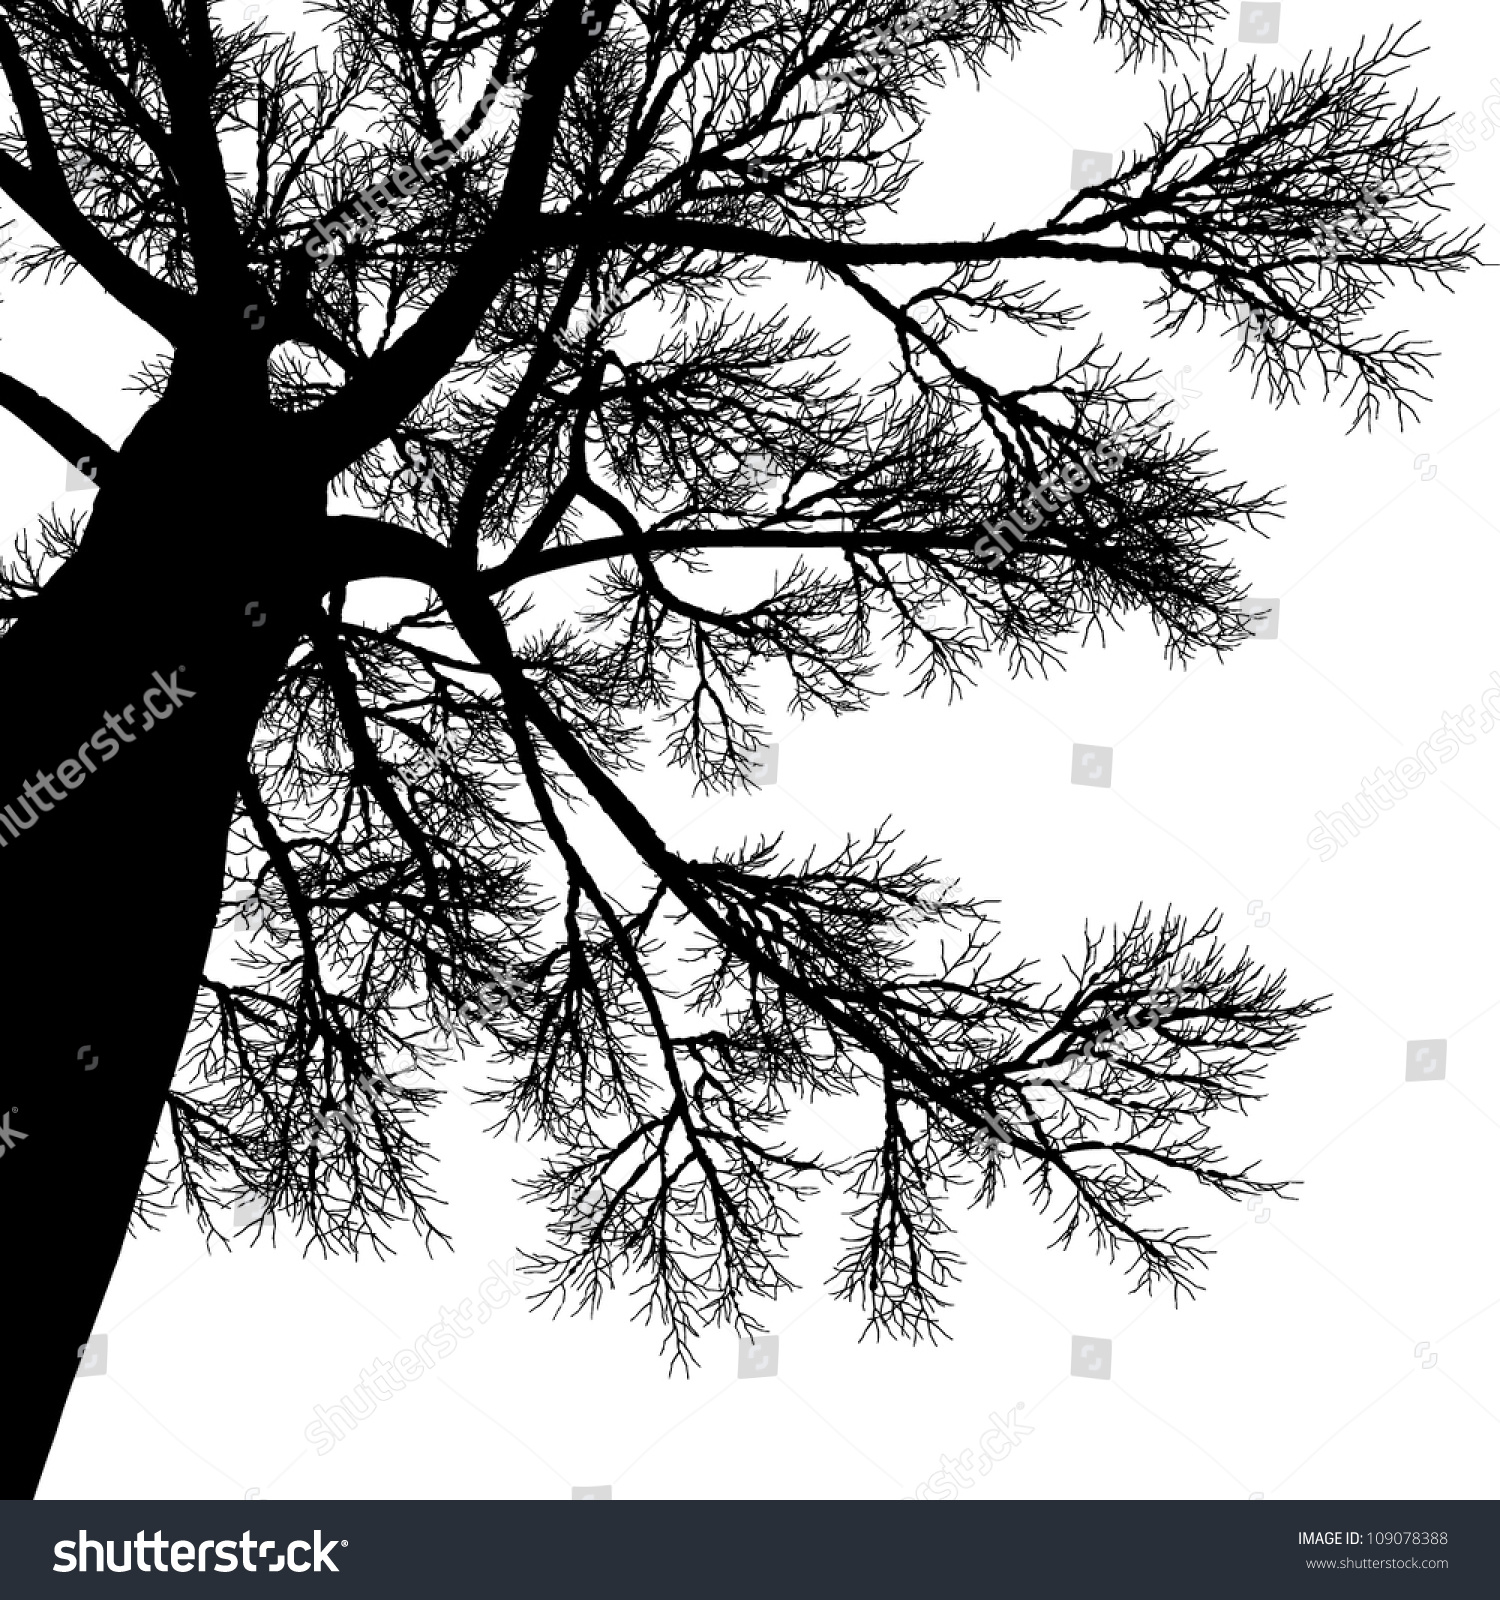 SVG of vector drawing of the tree - detailed vector svg